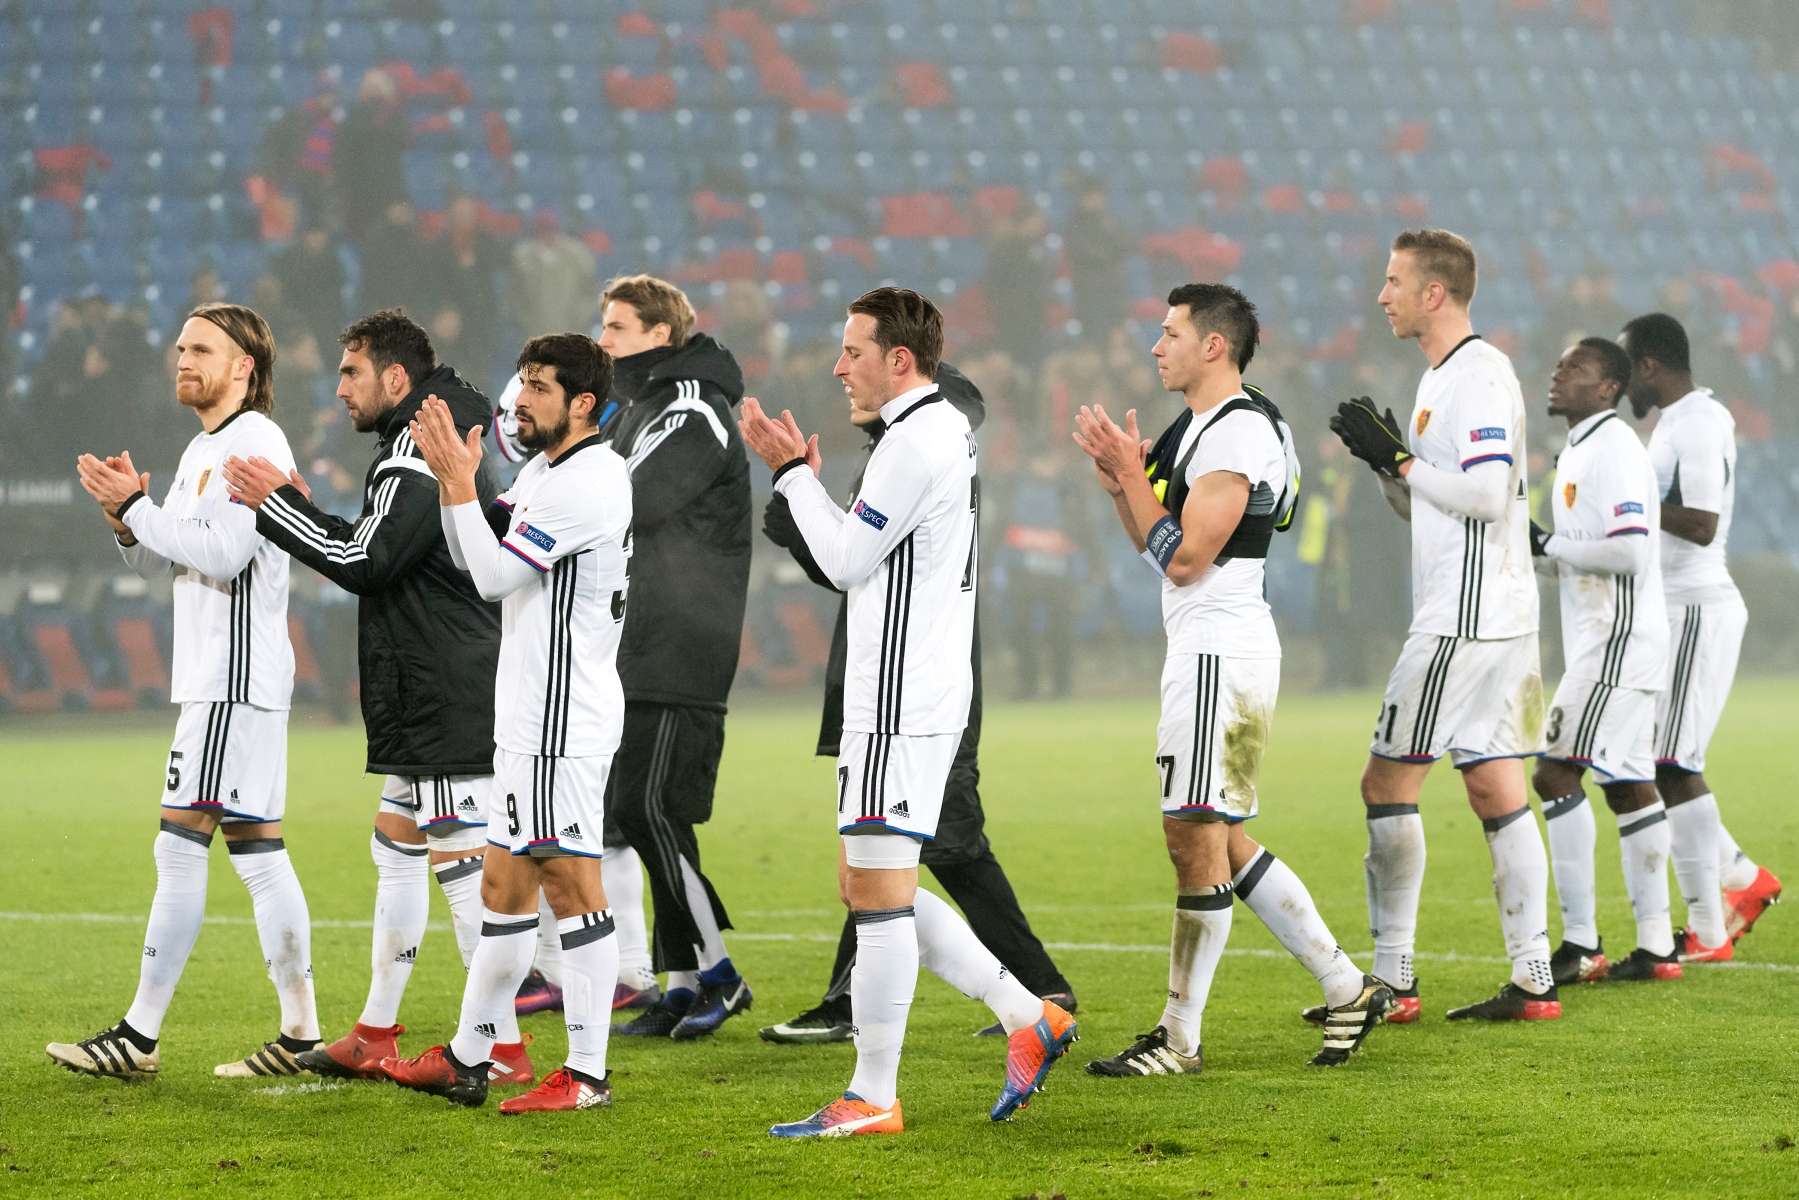 Basel's players thank the fans after an UEFA Champions League Group stage Group A matchday 6 soccer match between Switzerland's FC Basel 1893 and England's Arsenal FC in the St. Jakob-Park stadium in Basel, Switzerland, on Tuesday, December 6, 2016. (KEYSTONE/Georgios Kefalas) SWITZERLAND SOCCER CHAMPIONS LEAGUE BASEL ARSENAL